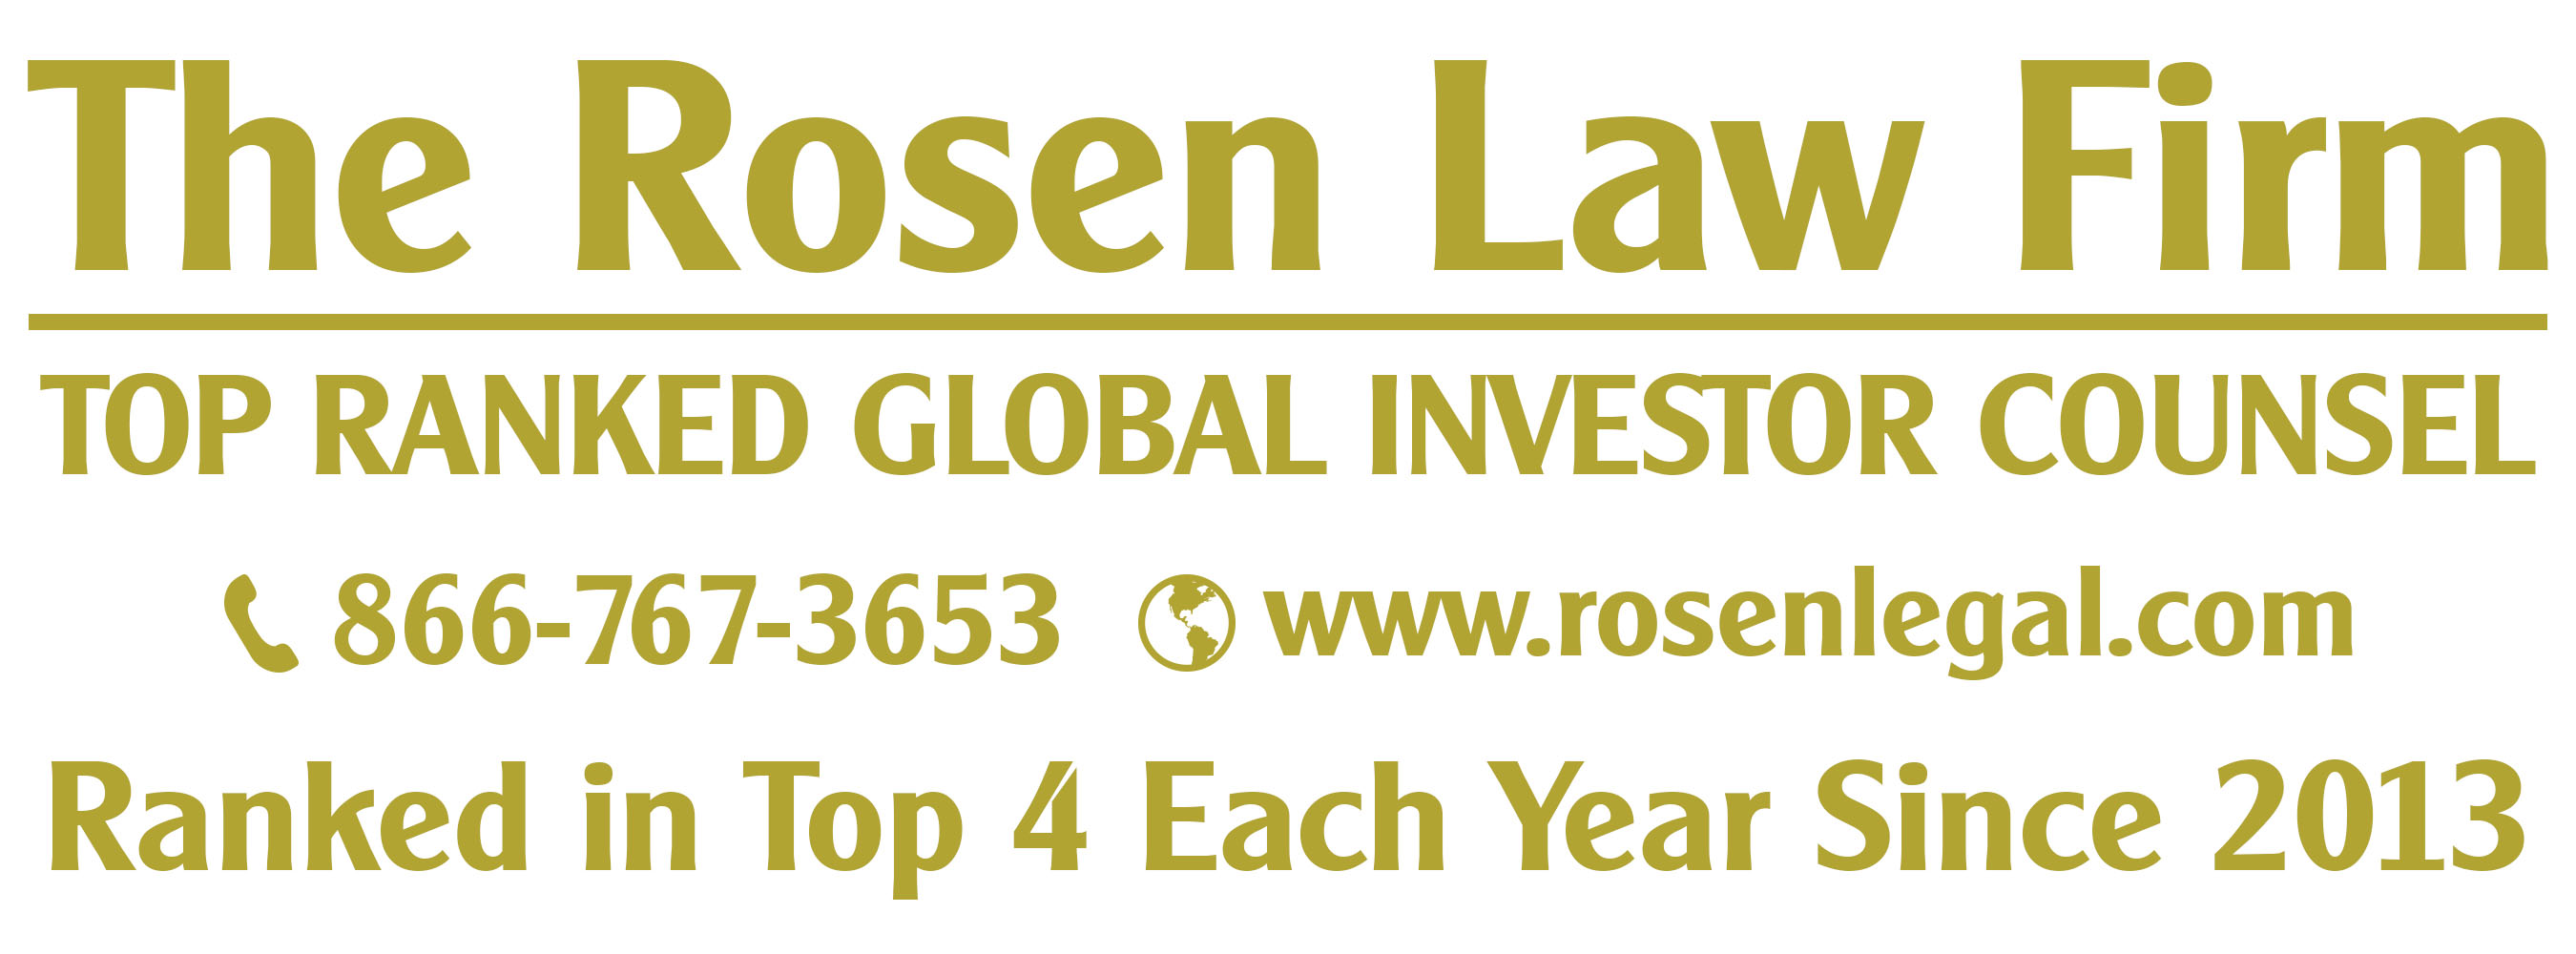 The Rosen Law Firm PA, Saturday December 3, 2022 Image of press release